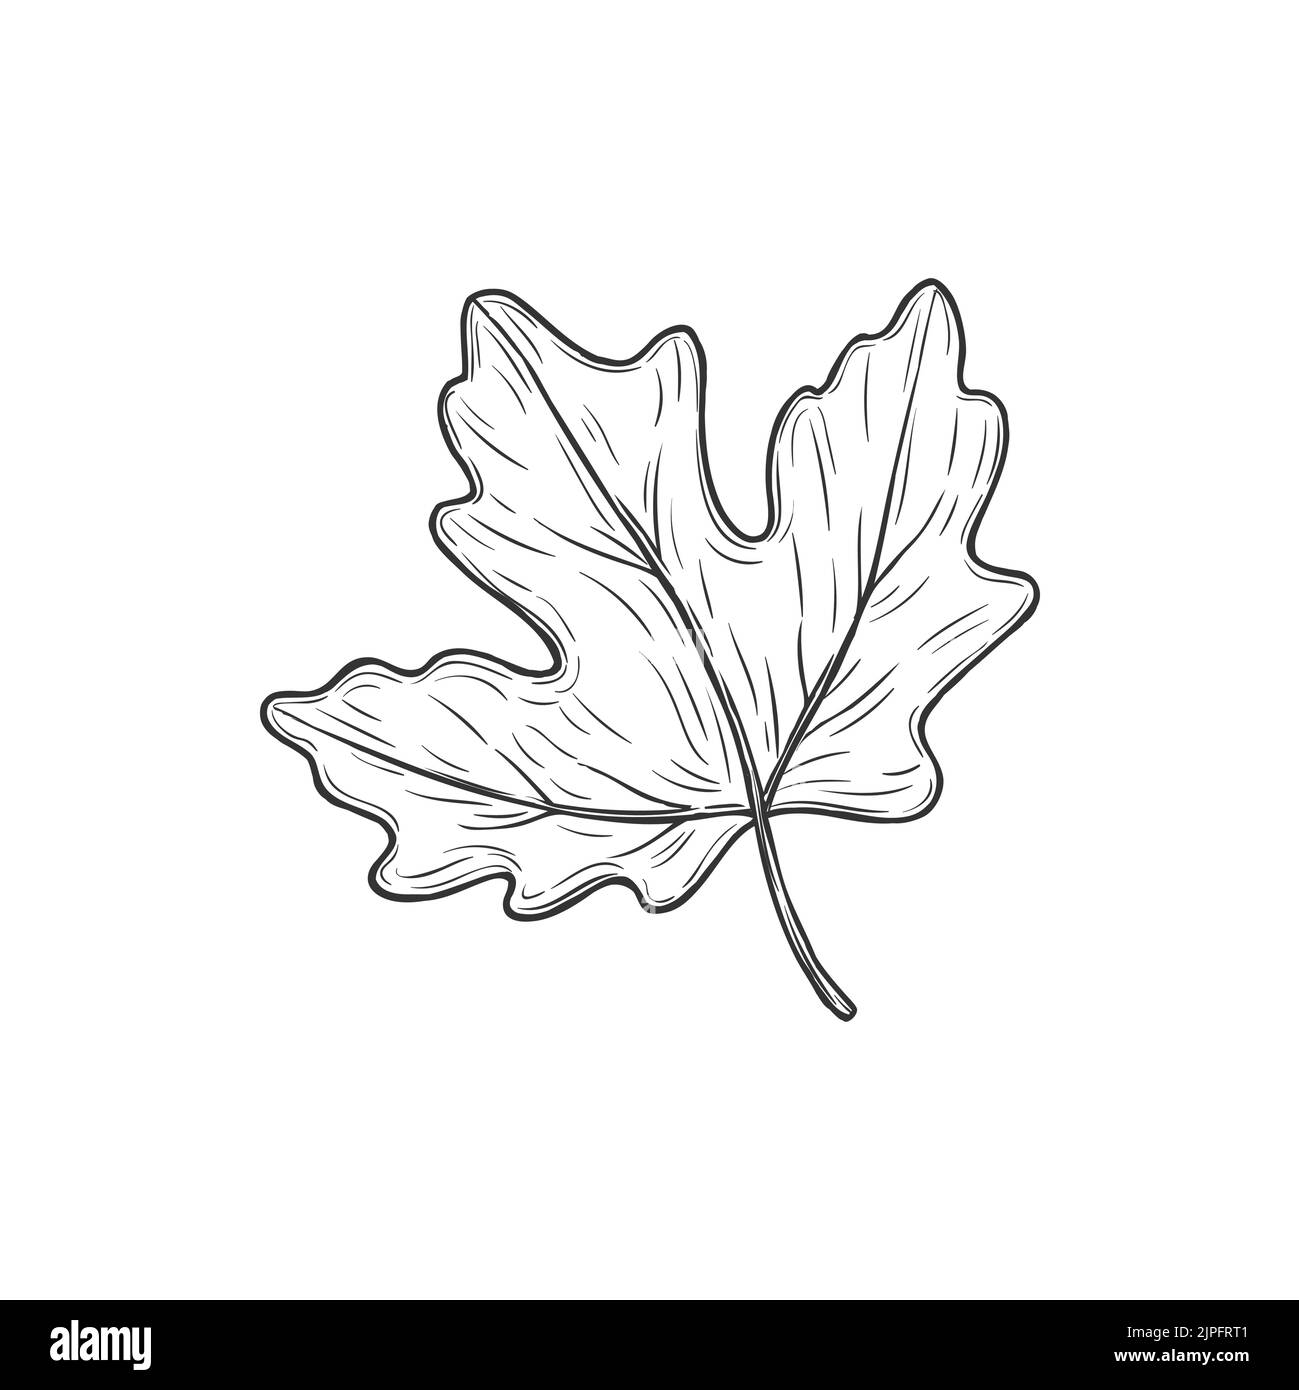 Viburnum leaf isolated plant sketch. Vector foliage on stem monochrome sketch, maple tree leafage. Spring or autumn symbol, leatherleaf decoration element. Fall or summer foliage hand drawn object Stock Vector